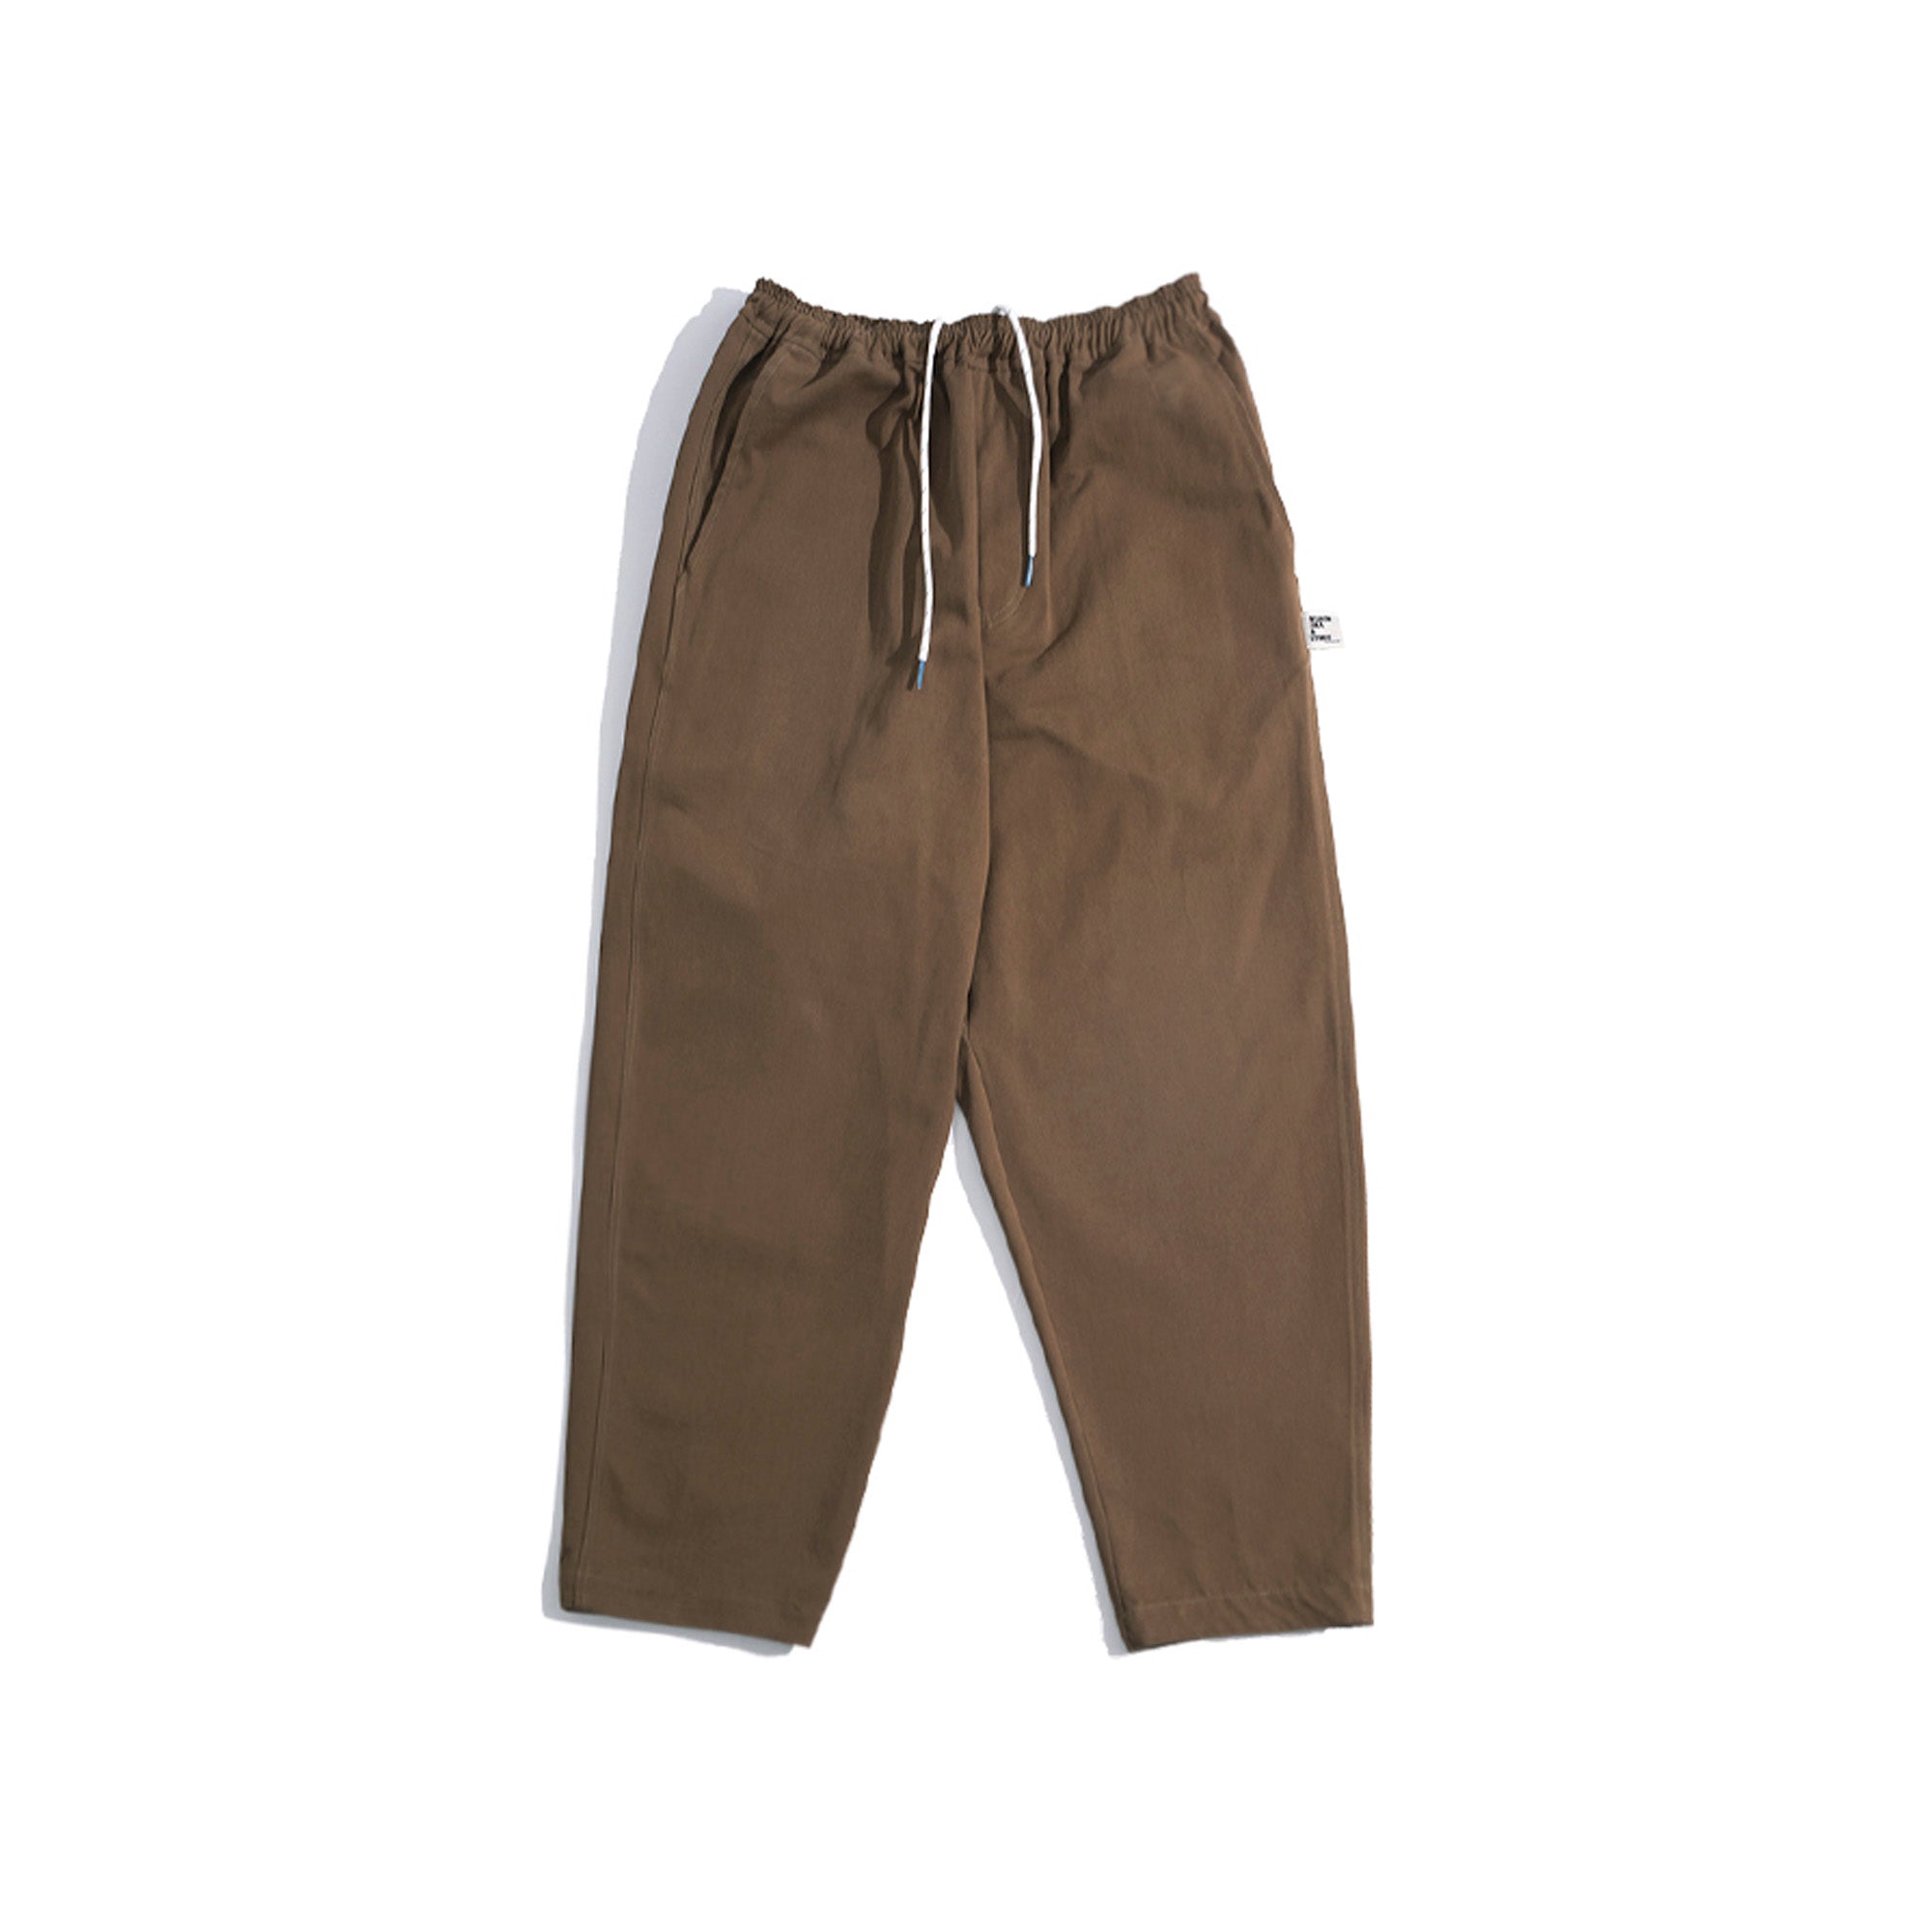 sand washed cotton work pants